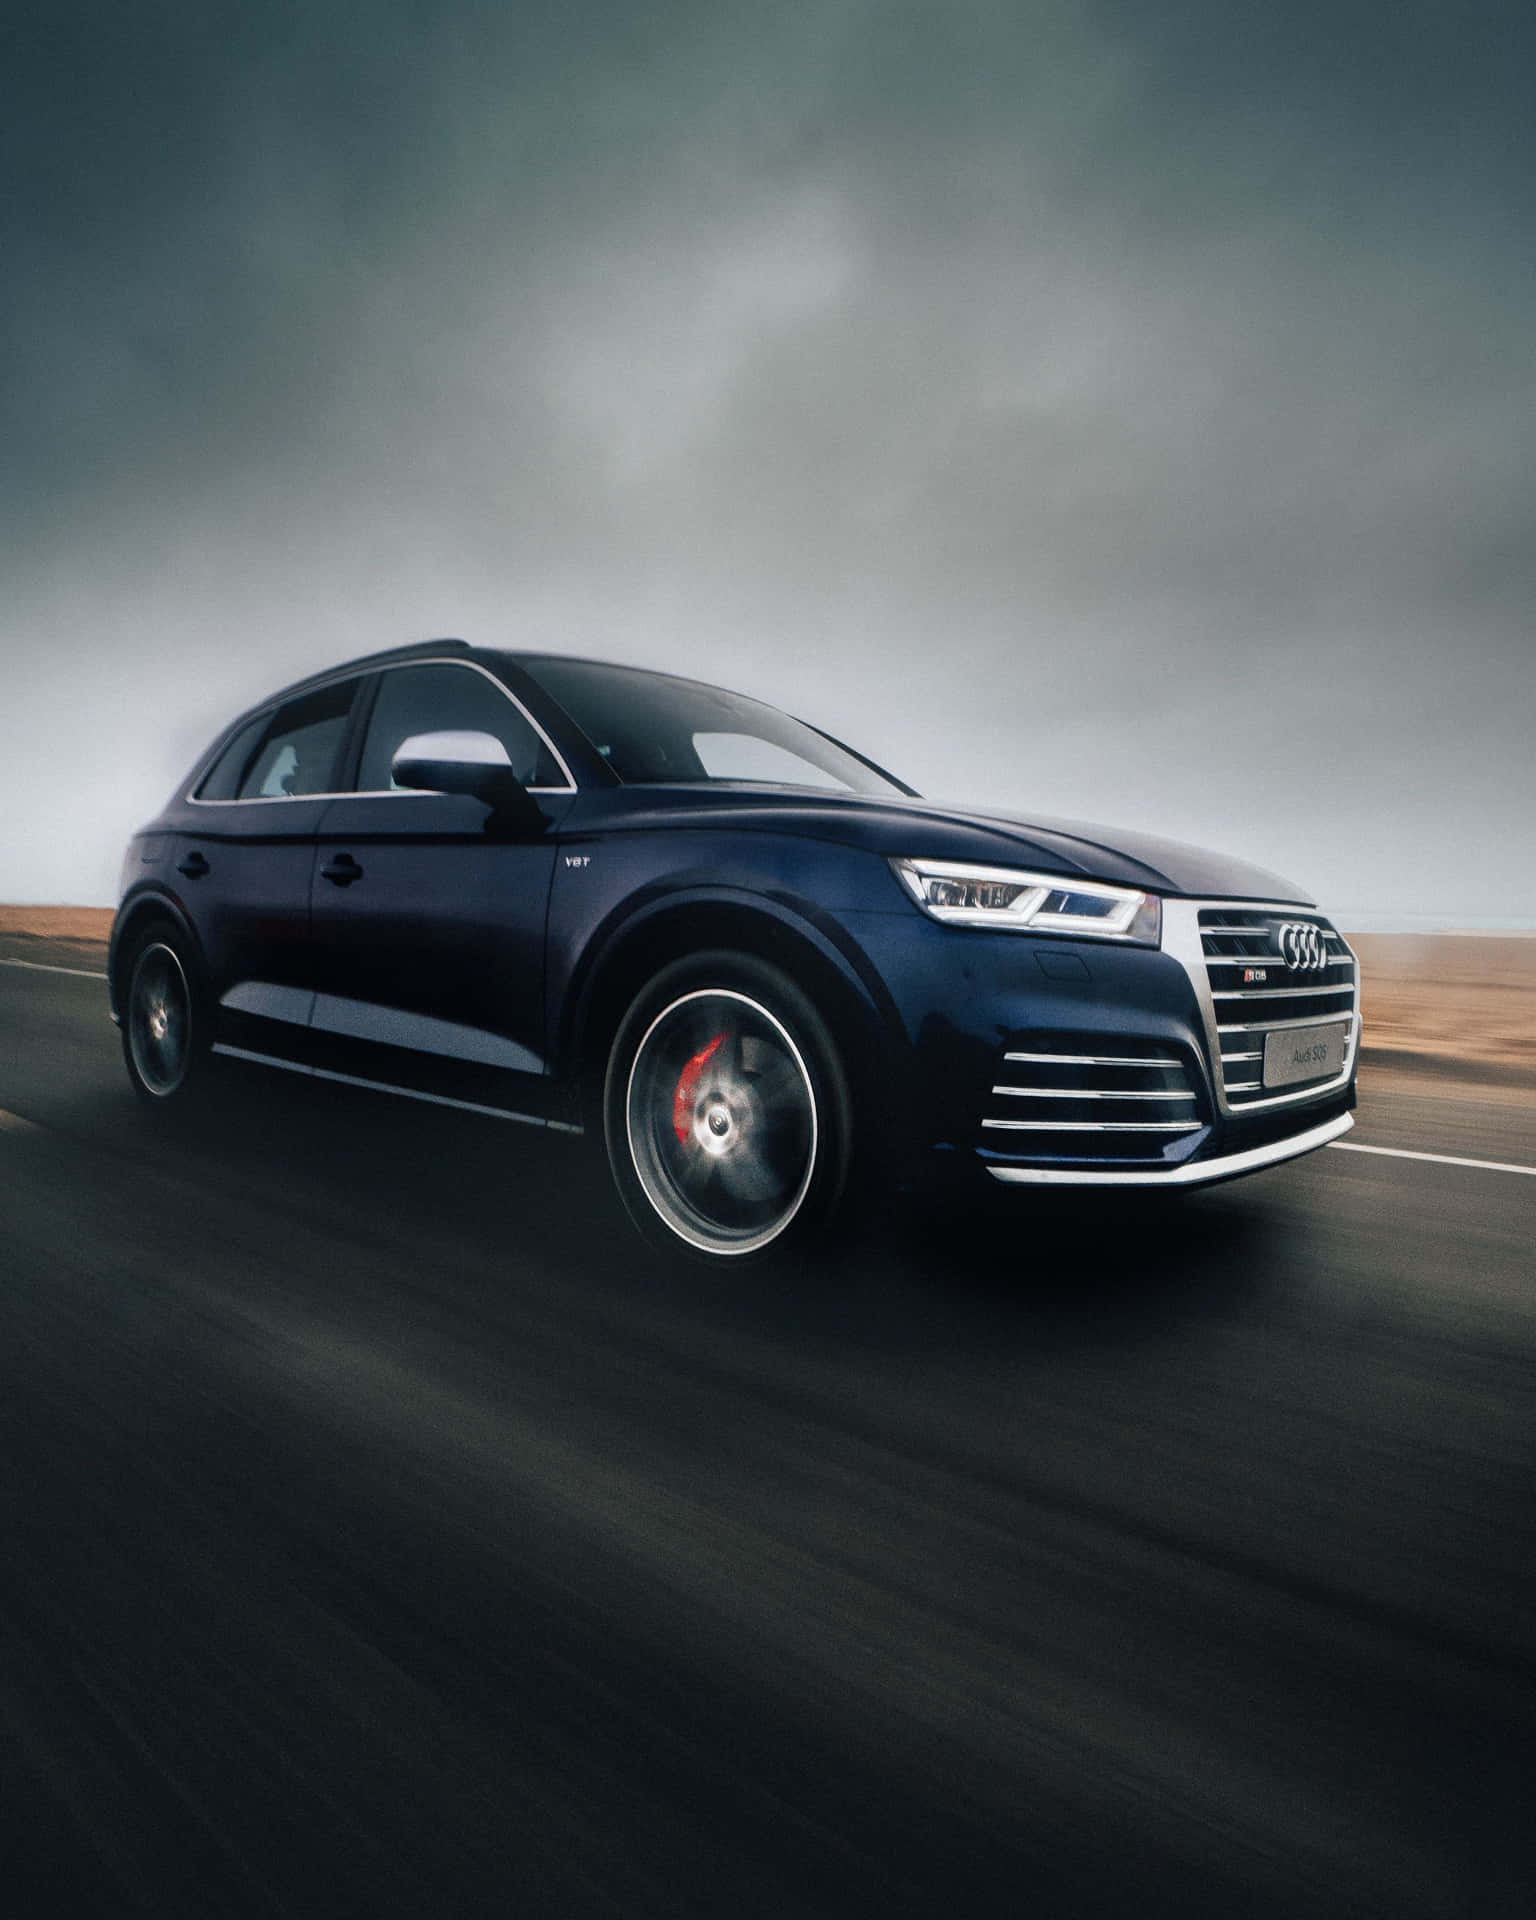 Audi SQ5 in Motion on the Road Wallpaper